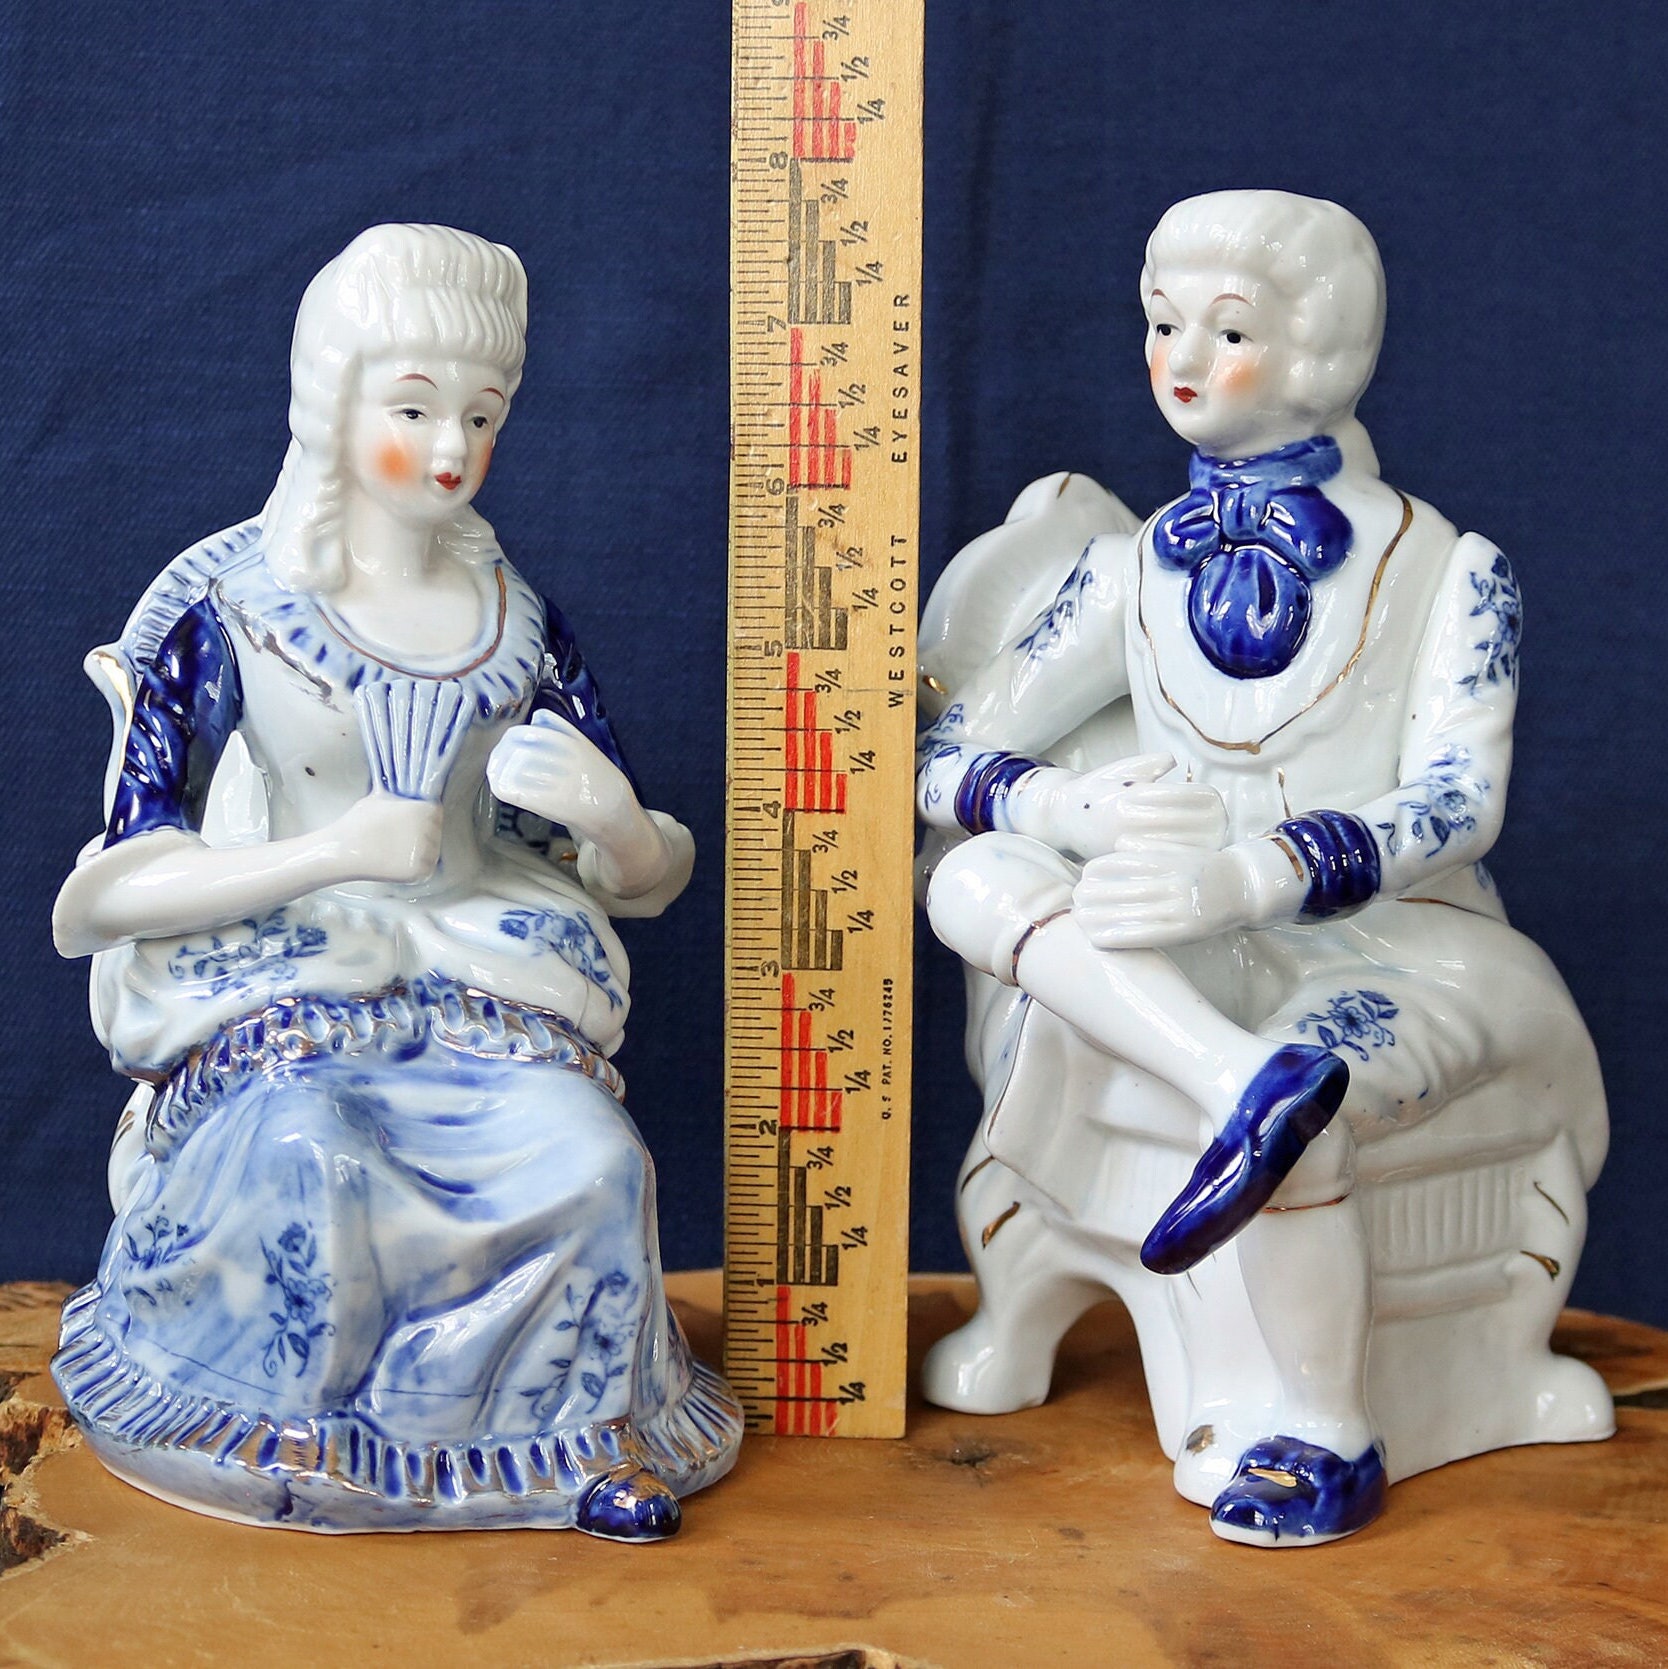 Vintage Blue and White Porcelain Figurines Victorian Era Courting